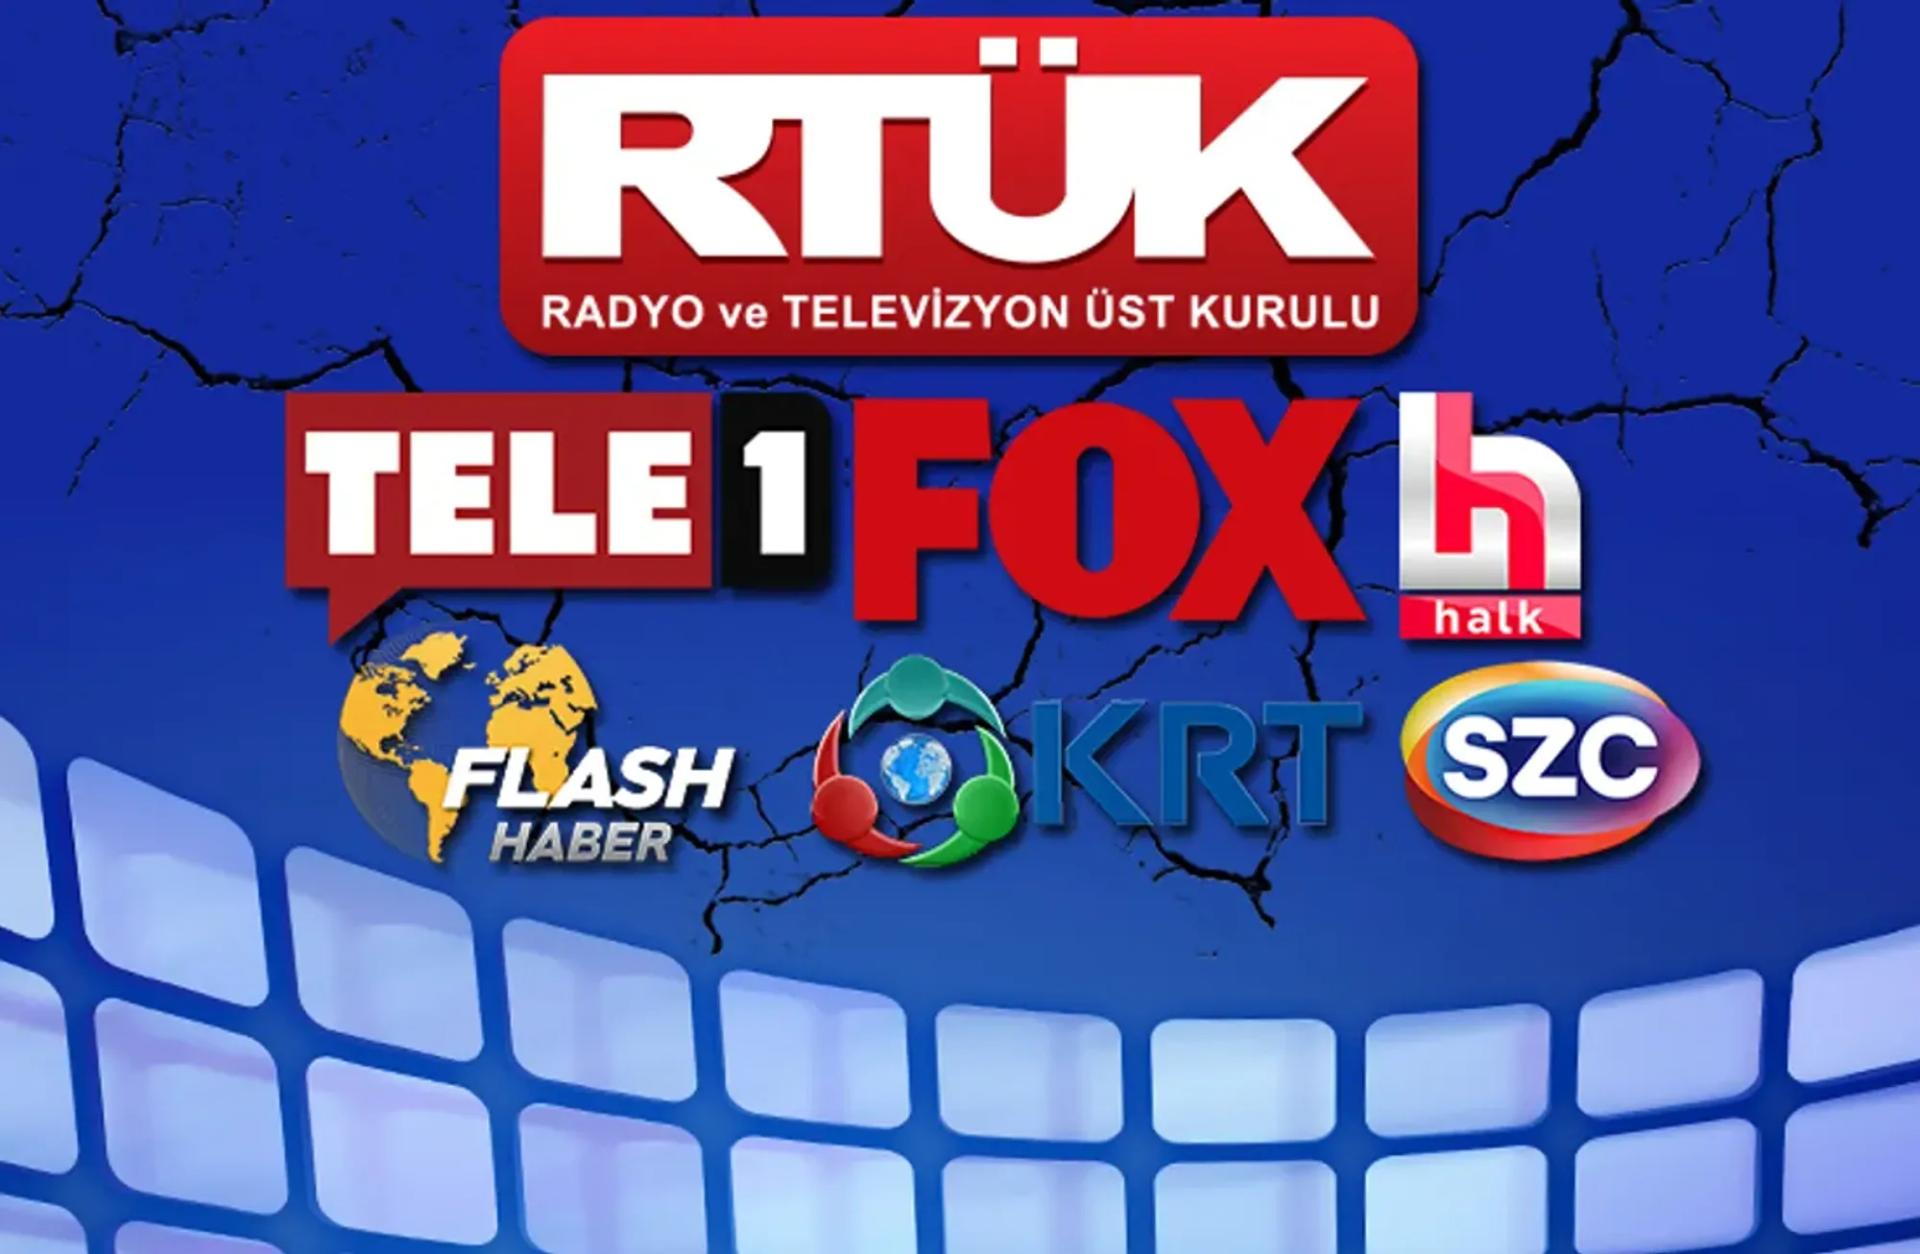 RTÜK Has Launched an Investigation Against Six Channels